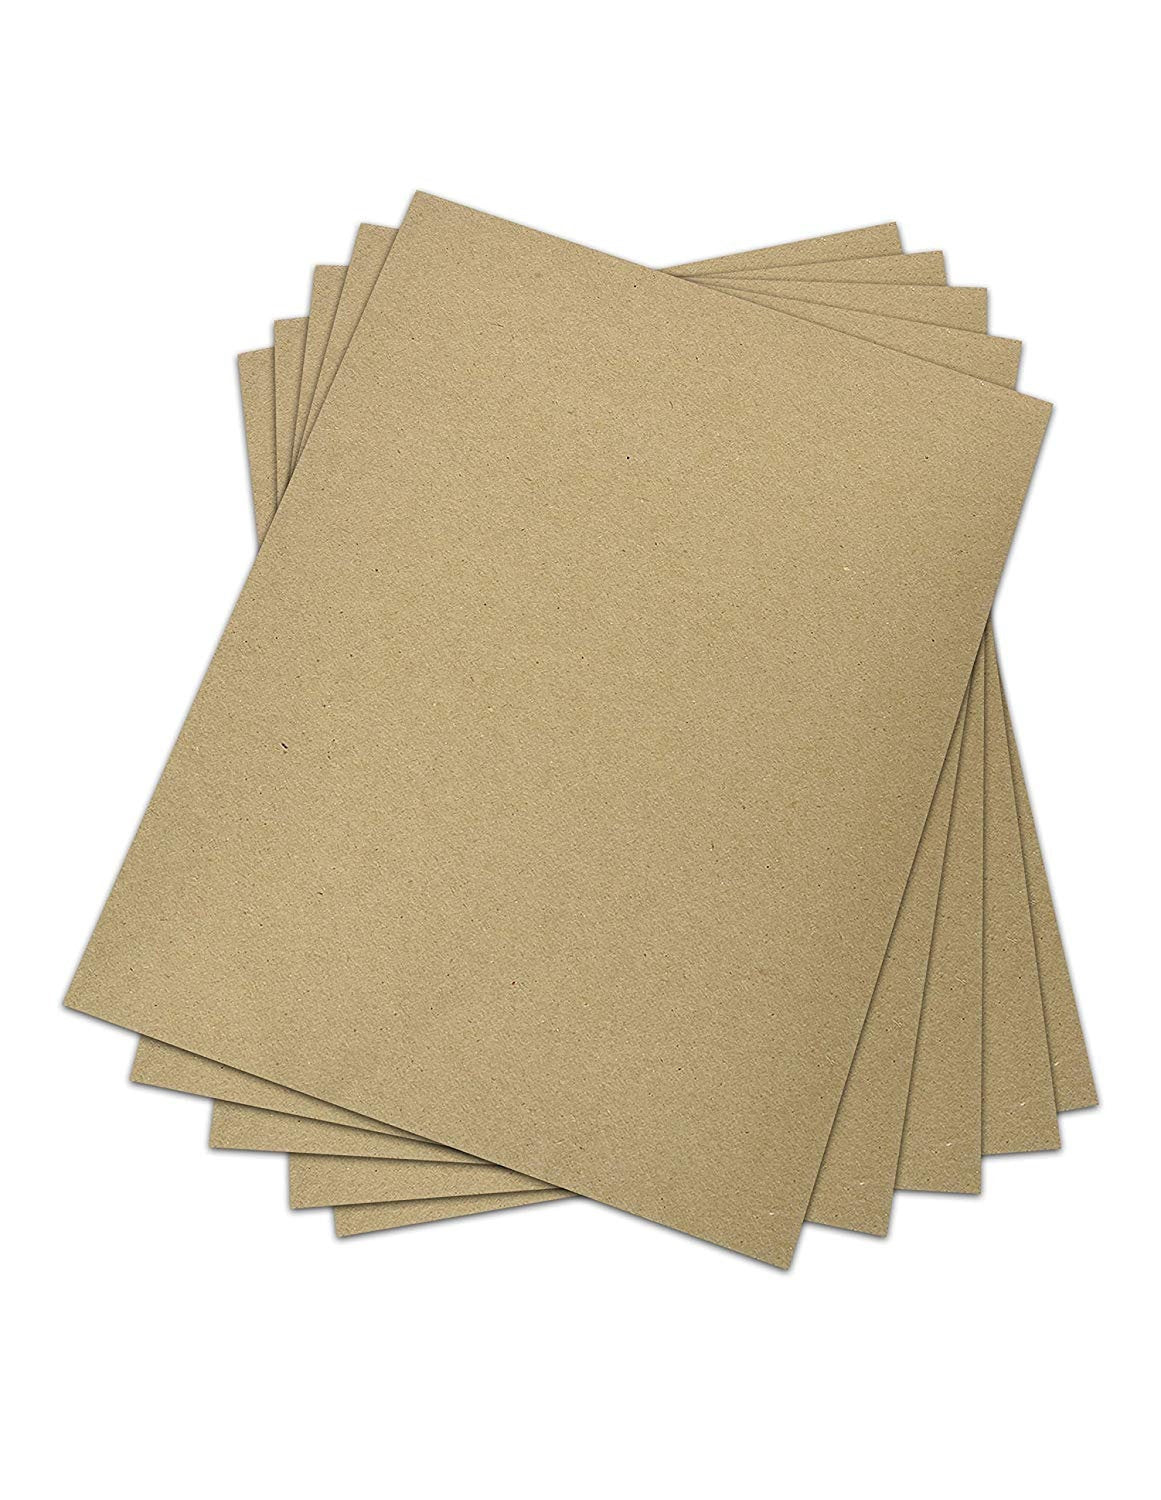 Chipboard Unusual Size and Thickness - Custom Cut